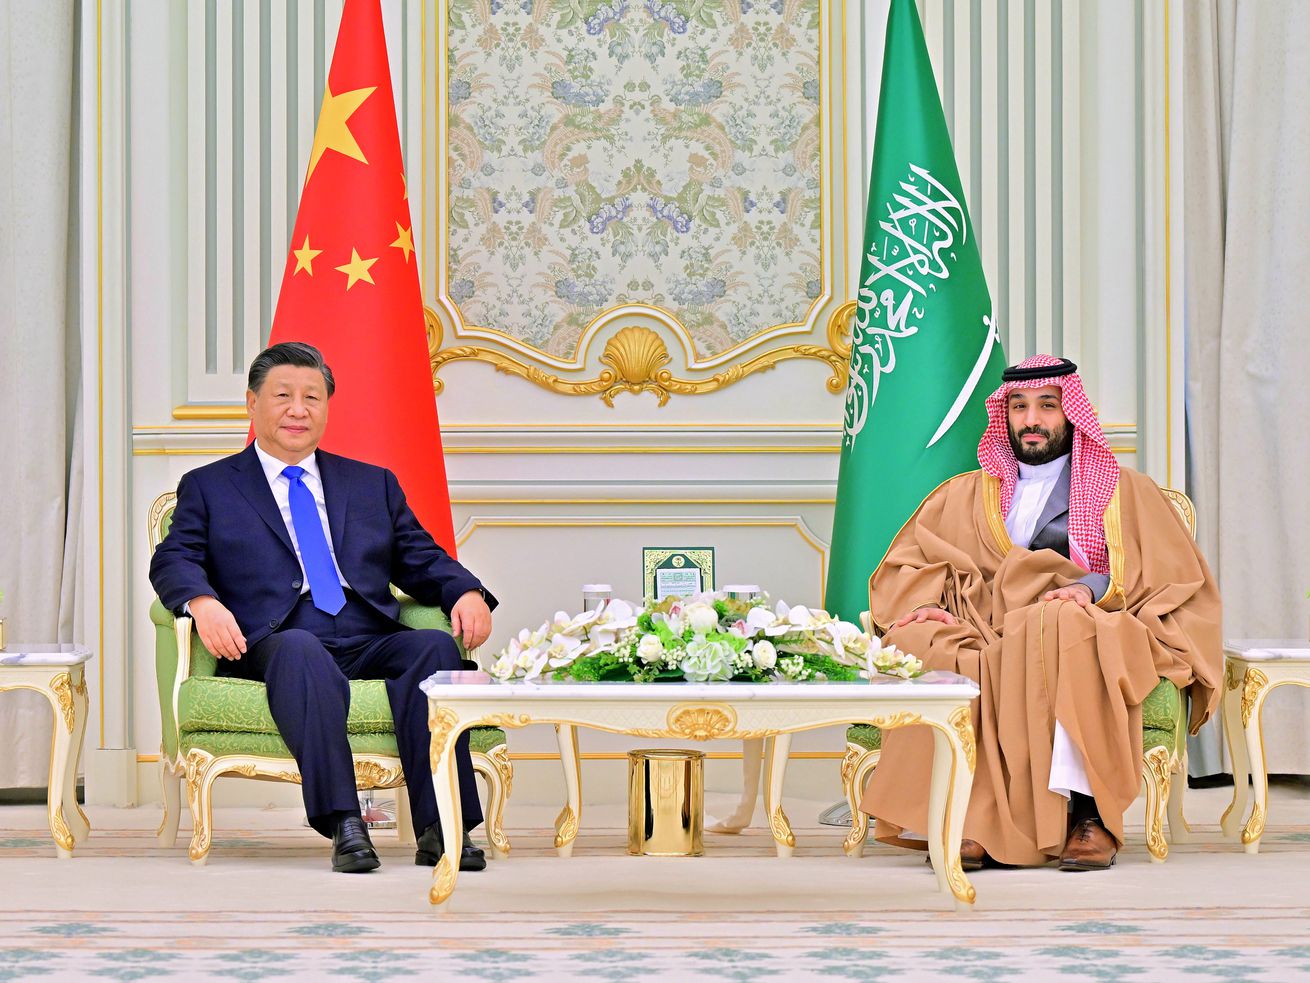 China’s alliance with Saudi Arabia signals a potential shift in the global order